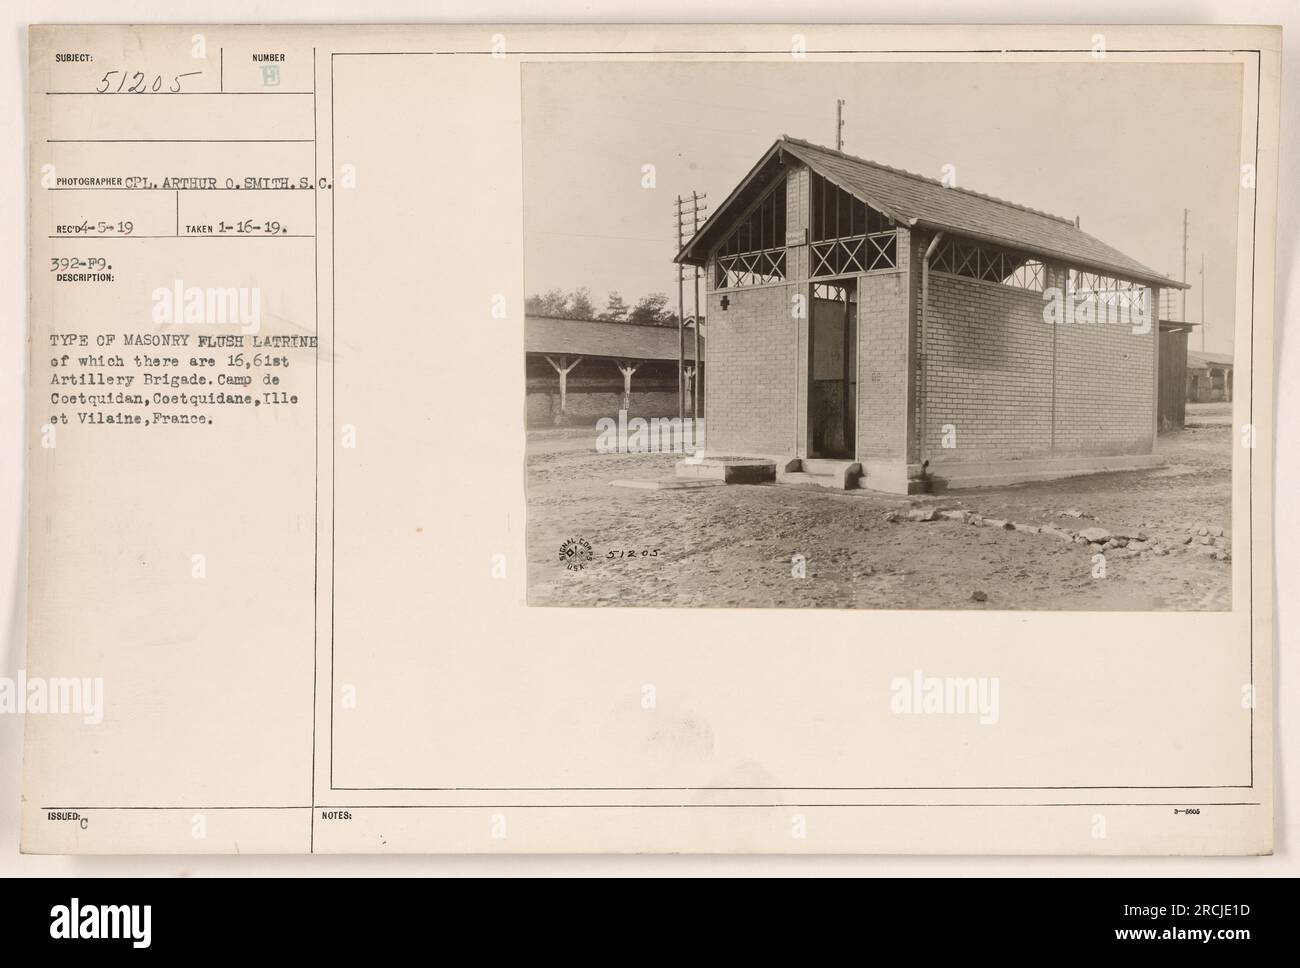 Image depicting one of the 16 masonry flush latrines at the 61st Artillery Brigade camp in Camp de Coetquidan, Coetquidane, Ille et Vilaine, France. This latrine is noted in DESCRIPTION NUMBER B, taken on January 16, 1919, by photographer Cpl. Arthur O. Smith, S.C. Stock Photo